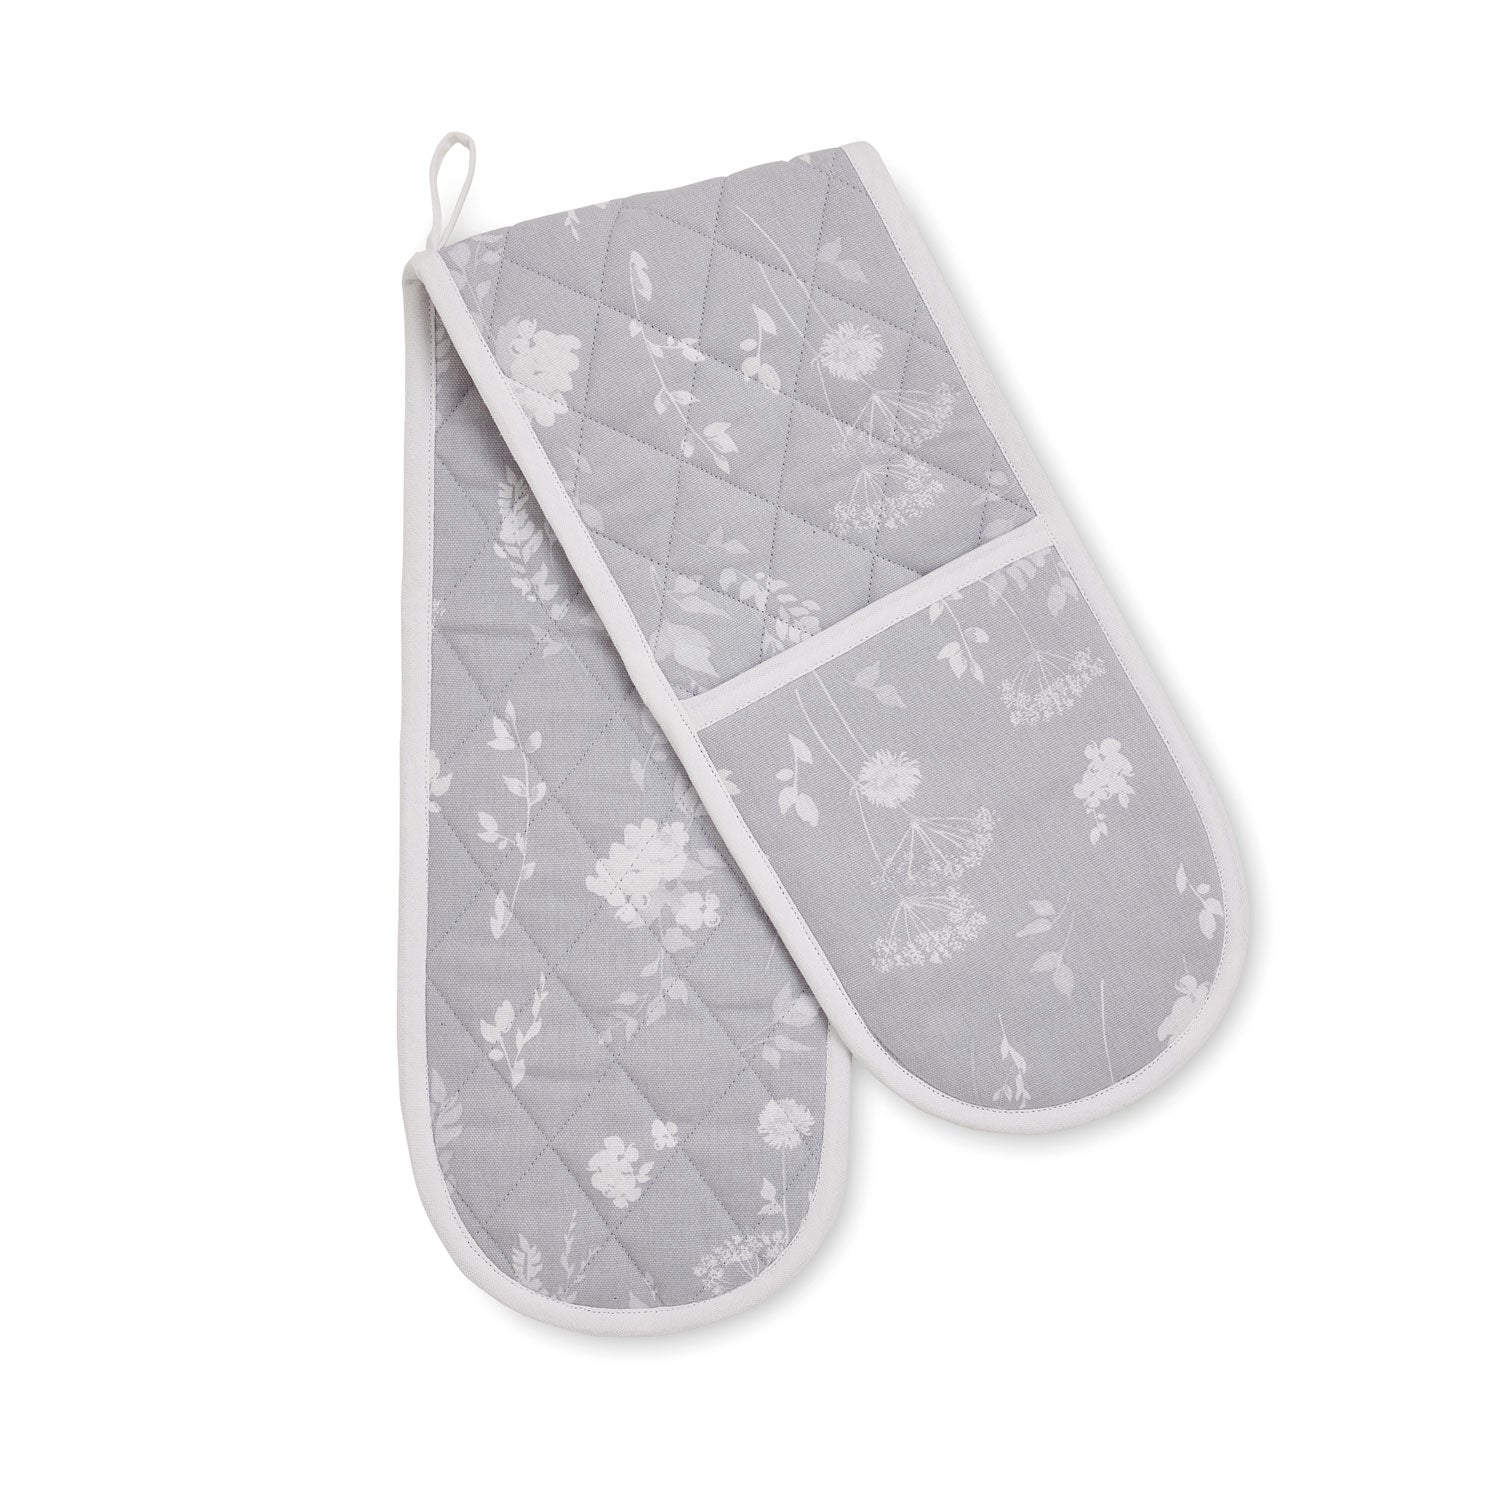 Catherine Lansfield Dining Meadowsweet Floral Double Oven Glove - White / Grey 1 Shaws Department Stores